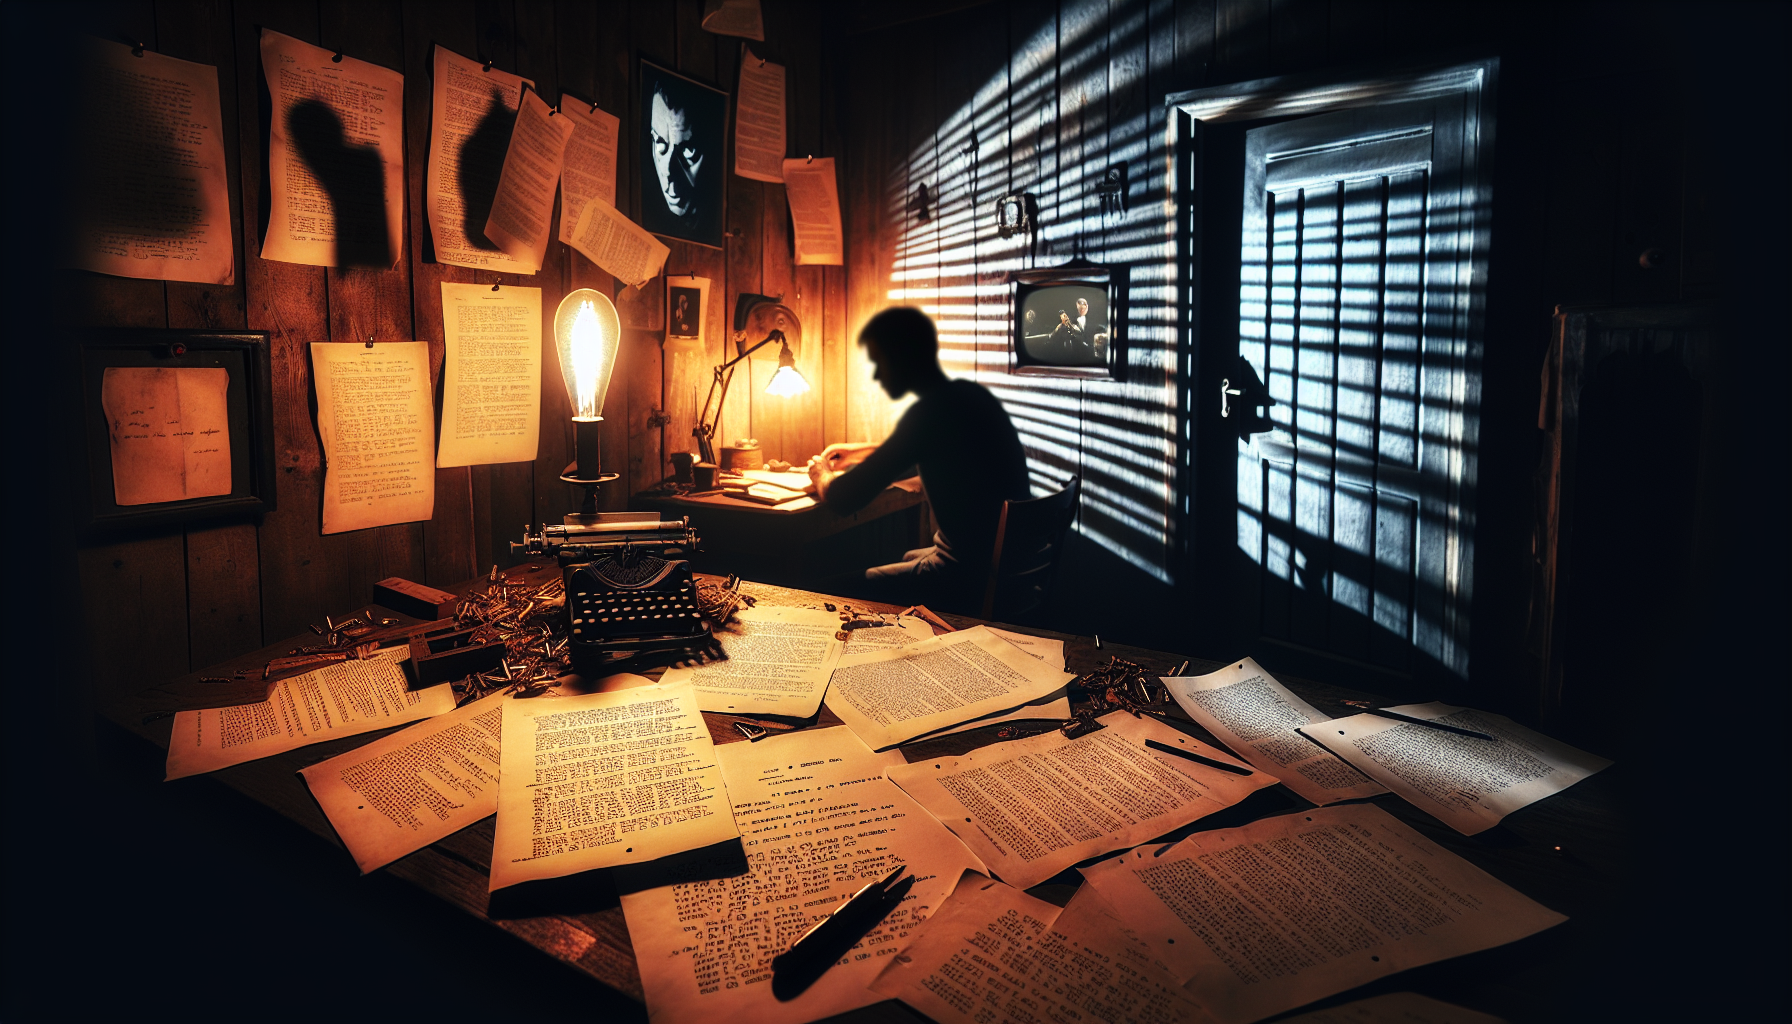 A dimly lit room with scattered pages of screenplay text on a wooden table, highlighting psychological concepts and notes. Eerie shadows dance on the walls, and in the background, a projector displays